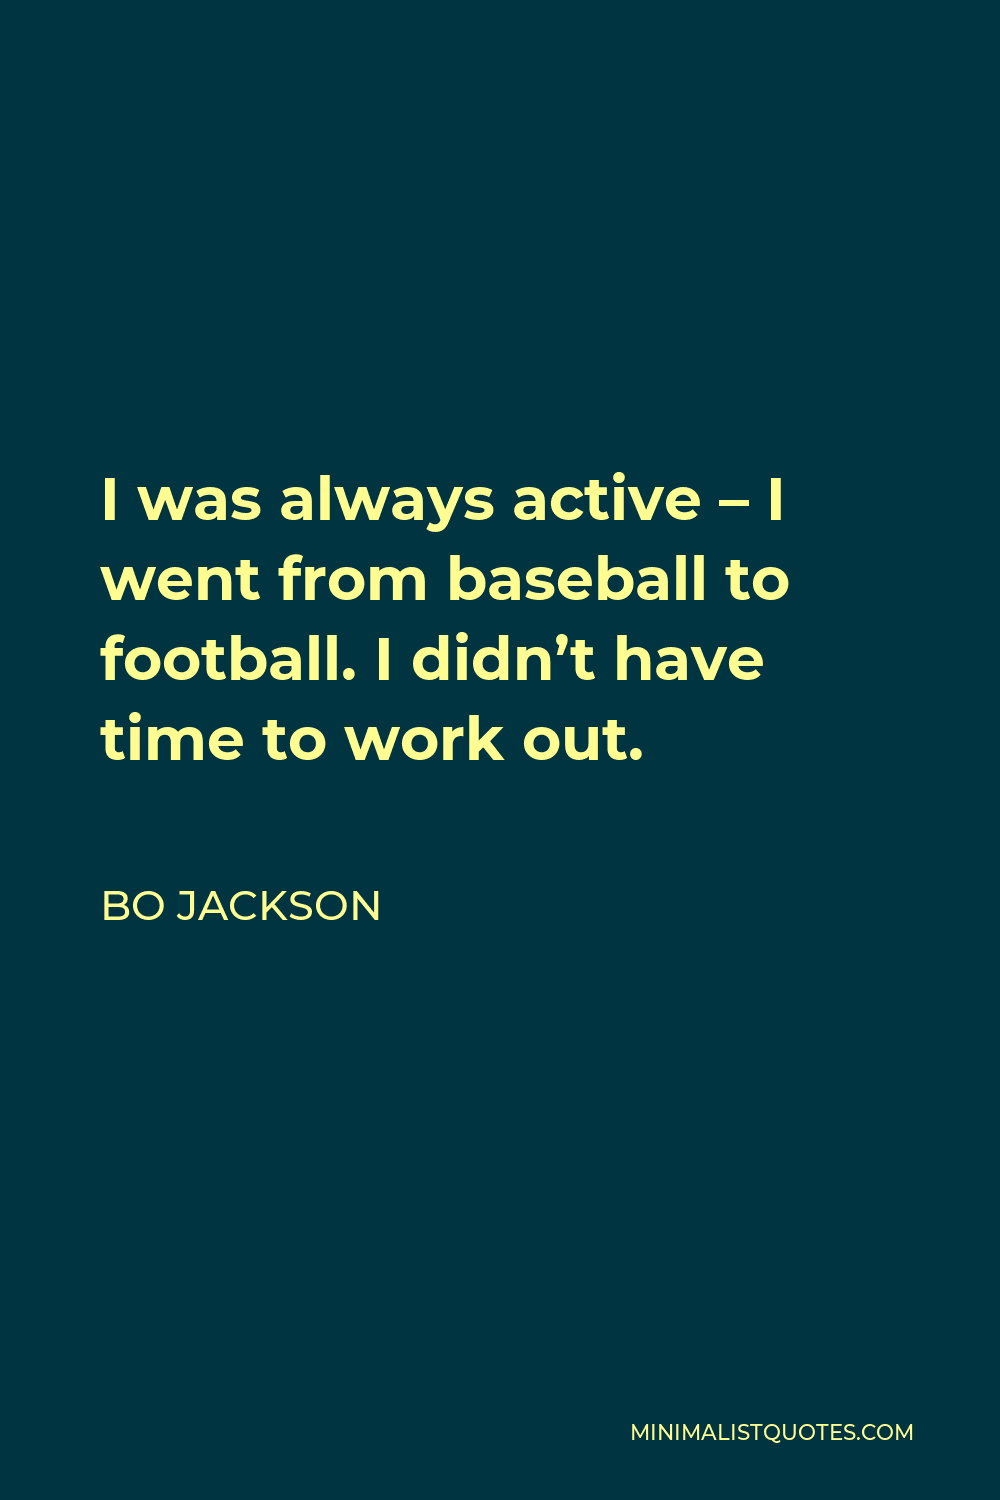 Bo Jackson Quote - I was always active – I went from baseball to football. I didn’t have time to work out.